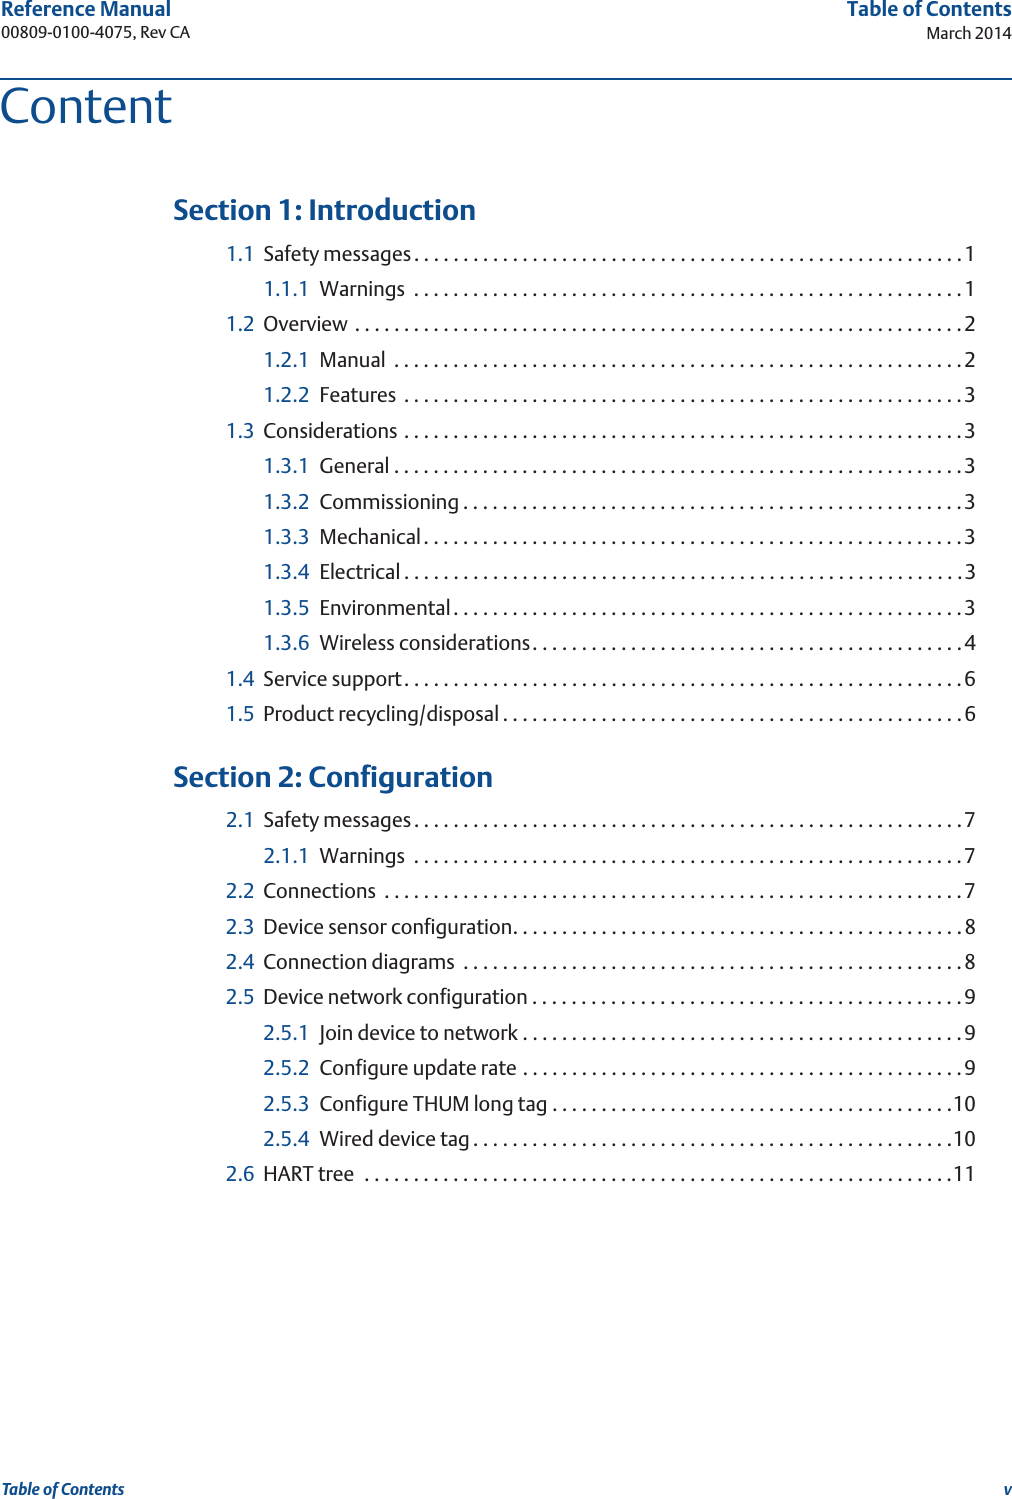 vReference Manual 00809-0100-4075, Rev CATable of ContentsMarch 2014Table of Contents 1Section 1: Introduction1.1 Safety messages. . . . . . . . . . . . . . . . . . . . . . . . . . . . . . . . . . . . . . . . . . . . . . . . . . . . . . . .11.1.1 Warnings  . . . . . . . . . . . . . . . . . . . . . . . . . . . . . . . . . . . . . . . . . . . . . . . . . . . . . . . .11.2 Overview . . . . . . . . . . . . . . . . . . . . . . . . . . . . . . . . . . . . . . . . . . . . . . . . . . . . . . . . . . . . . .21.2.1 Manual  . . . . . . . . . . . . . . . . . . . . . . . . . . . . . . . . . . . . . . . . . . . . . . . . . . . . . . . . . .21.2.2 Features  . . . . . . . . . . . . . . . . . . . . . . . . . . . . . . . . . . . . . . . . . . . . . . . . . . . . . . . . .31.3 Considerations . . . . . . . . . . . . . . . . . . . . . . . . . . . . . . . . . . . . . . . . . . . . . . . . . . . . . . . . .31.3.1 General . . . . . . . . . . . . . . . . . . . . . . . . . . . . . . . . . . . . . . . . . . . . . . . . . . . . . . . . . .31.3.2 Commissioning . . . . . . . . . . . . . . . . . . . . . . . . . . . . . . . . . . . . . . . . . . . . . . . . . . .31.3.3 Mechanical. . . . . . . . . . . . . . . . . . . . . . . . . . . . . . . . . . . . . . . . . . . . . . . . . . . . . . .31.3.4 Electrical . . . . . . . . . . . . . . . . . . . . . . . . . . . . . . . . . . . . . . . . . . . . . . . . . . . . . . . . .31.3.5 Environmental. . . . . . . . . . . . . . . . . . . . . . . . . . . . . . . . . . . . . . . . . . . . . . . . . . . .31.3.6 Wireless considerations. . . . . . . . . . . . . . . . . . . . . . . . . . . . . . . . . . . . . . . . . . . .41.4 Service support. . . . . . . . . . . . . . . . . . . . . . . . . . . . . . . . . . . . . . . . . . . . . . . . . . . . . . . . .61.5 Product recycling/disposal . . . . . . . . . . . . . . . . . . . . . . . . . . . . . . . . . . . . . . . . . . . . . . .6 2Section 2: Configuration2.1 Safety messages. . . . . . . . . . . . . . . . . . . . . . . . . . . . . . . . . . . . . . . . . . . . . . . . . . . . . . . .72.1.1 Warnings  . . . . . . . . . . . . . . . . . . . . . . . . . . . . . . . . . . . . . . . . . . . . . . . . . . . . . . . .72.2 Connections  . . . . . . . . . . . . . . . . . . . . . . . . . . . . . . . . . . . . . . . . . . . . . . . . . . . . . . . . . . .72.3 Device sensor configuration. . . . . . . . . . . . . . . . . . . . . . . . . . . . . . . . . . . . . . . . . . . . . .82.4 Connection diagrams  . . . . . . . . . . . . . . . . . . . . . . . . . . . . . . . . . . . . . . . . . . . . . . . . . . .82.5 Device network configuration . . . . . . . . . . . . . . . . . . . . . . . . . . . . . . . . . . . . . . . . . . . .92.5.1 Join device to network . . . . . . . . . . . . . . . . . . . . . . . . . . . . . . . . . . . . . . . . . . . . .92.5.2 Configure update rate . . . . . . . . . . . . . . . . . . . . . . . . . . . . . . . . . . . . . . . . . . . . .92.5.3 Configure THUM long tag . . . . . . . . . . . . . . . . . . . . . . . . . . . . . . . . . . . . . . . . .102.5.4 Wired device tag . . . . . . . . . . . . . . . . . . . . . . . . . . . . . . . . . . . . . . . . . . . . . . . . .102.6 HART tree  . . . . . . . . . . . . . . . . . . . . . . . . . . . . . . . . . . . . . . . . . . . . . . . . . . . . . . . . . . . .11Content